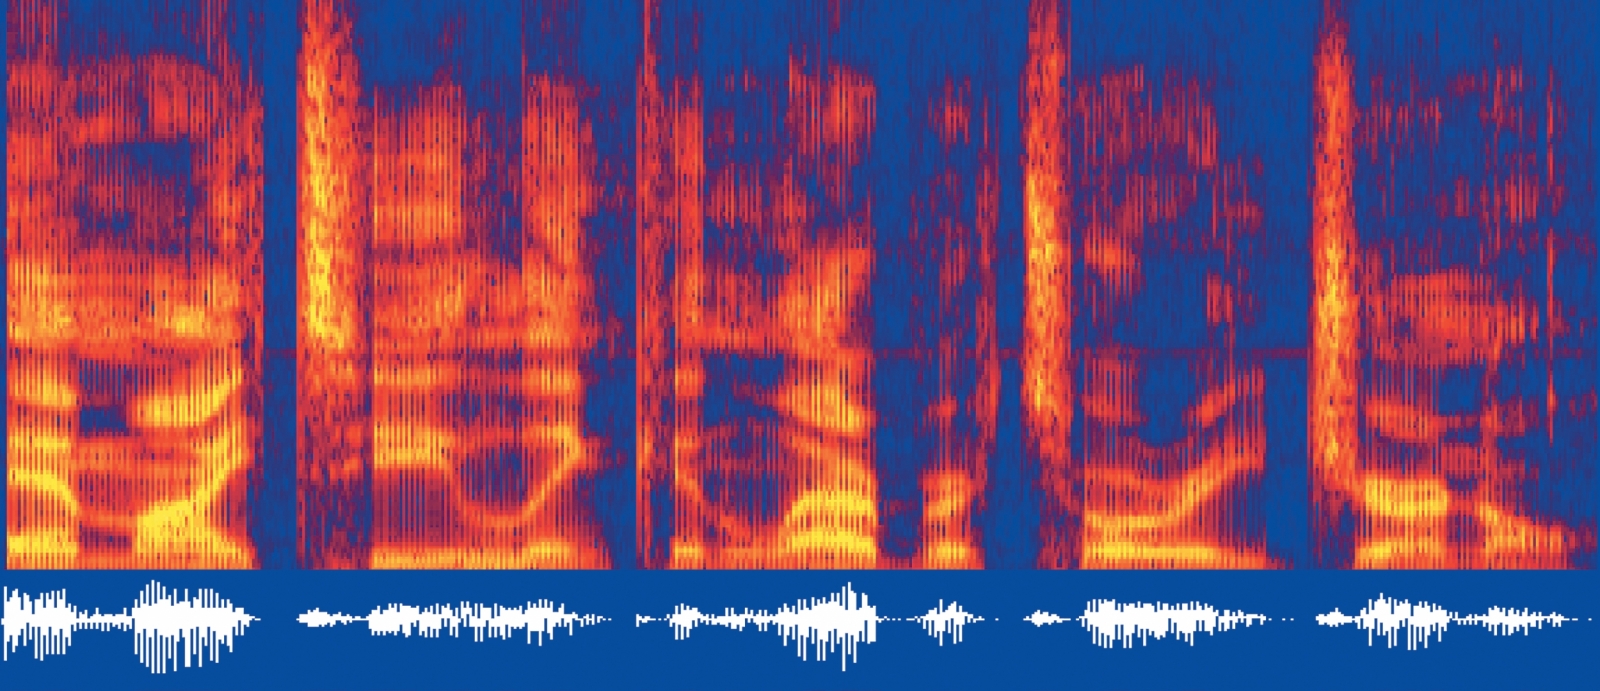 The image shows the underlying time-frequency characteristics of speech that are exploited by automatic recognition systems. 